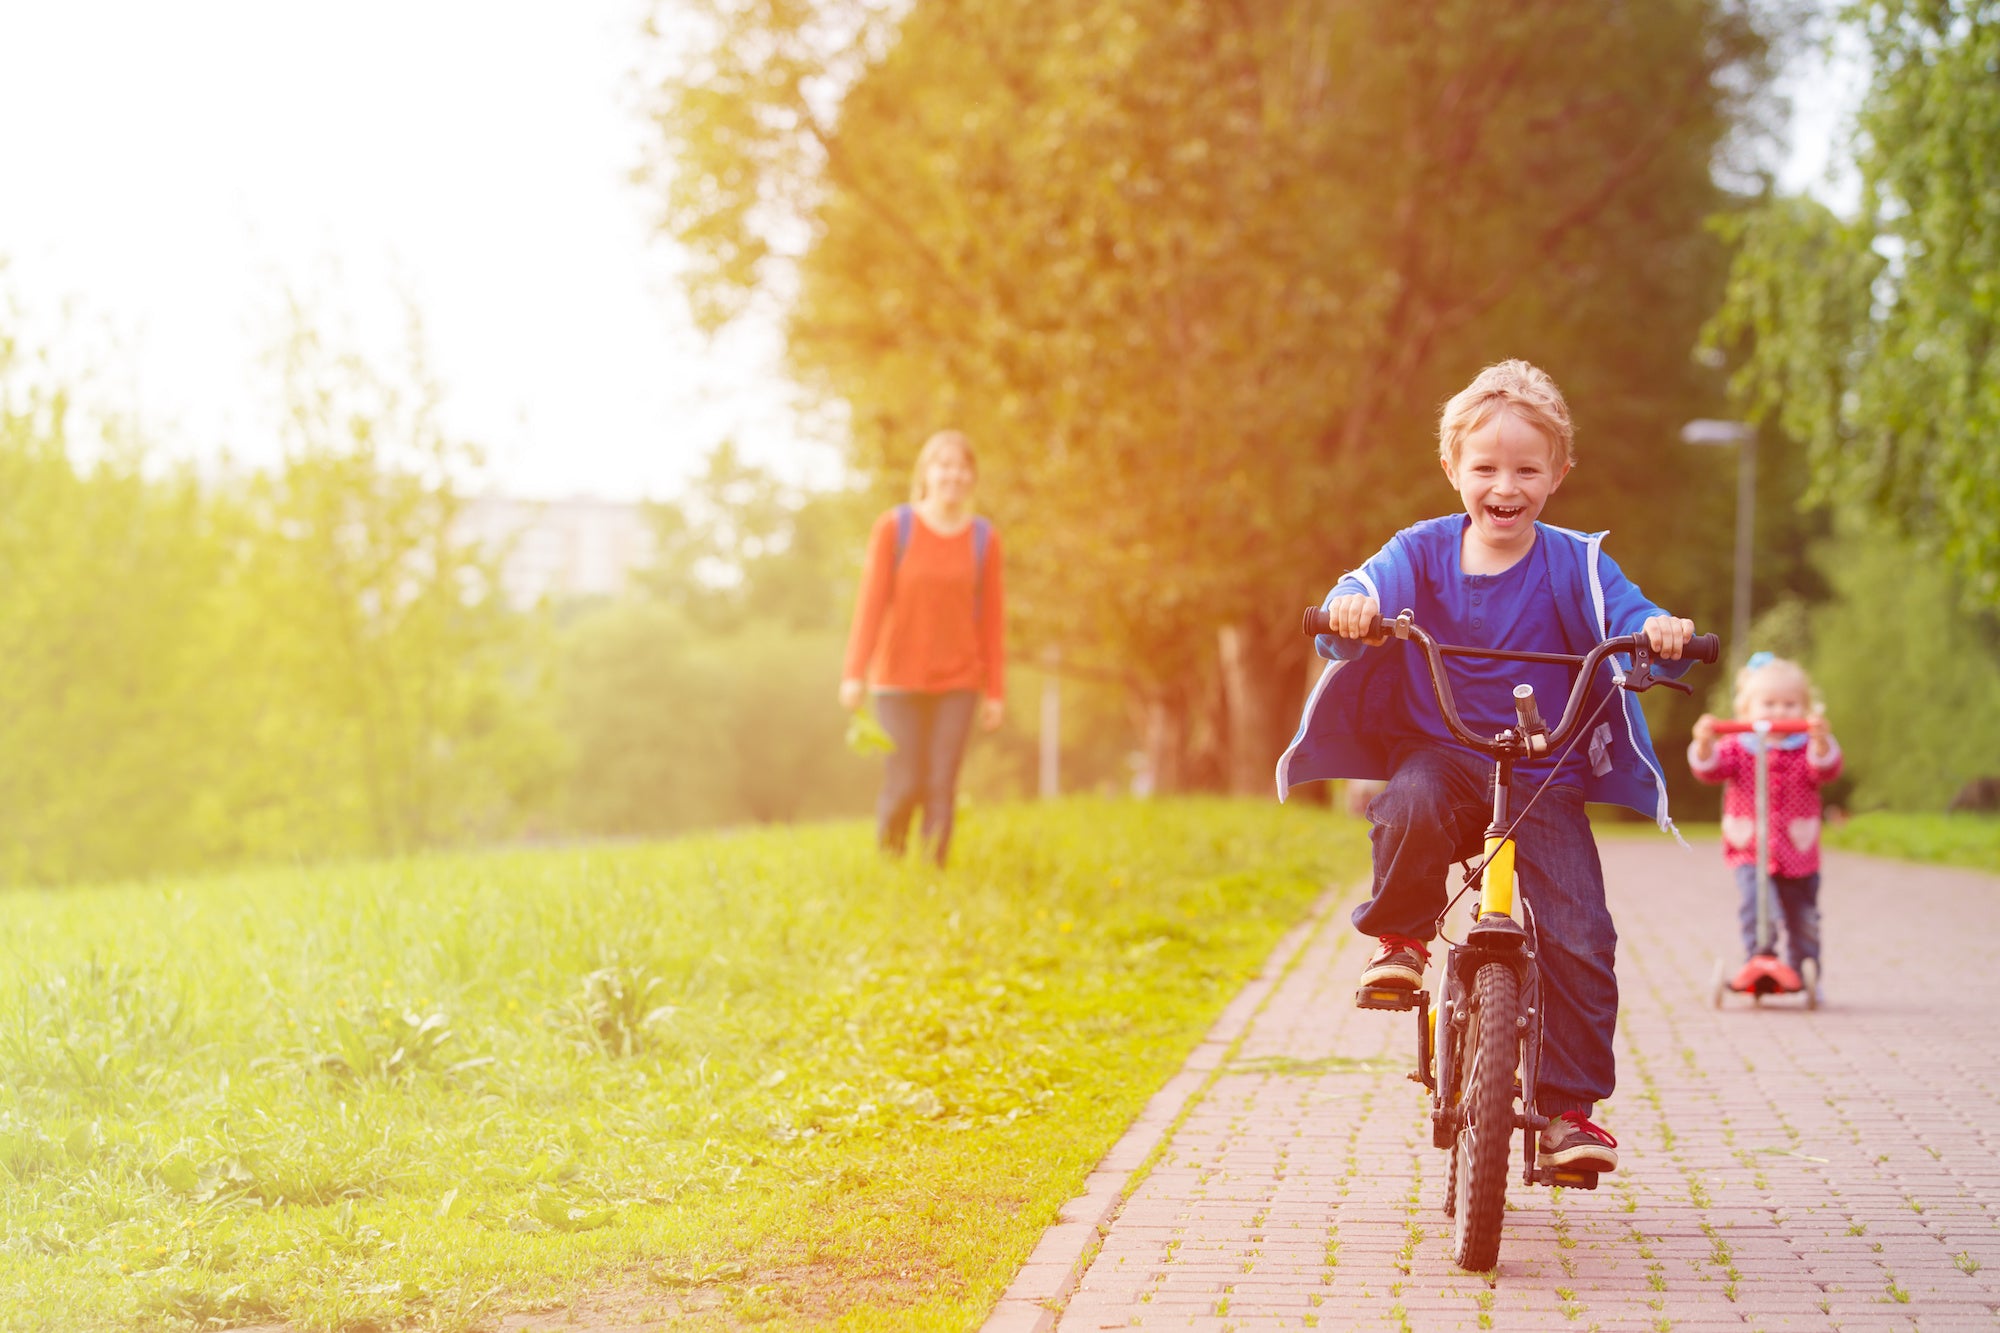 how to teach a child to ride a bike with training wheels